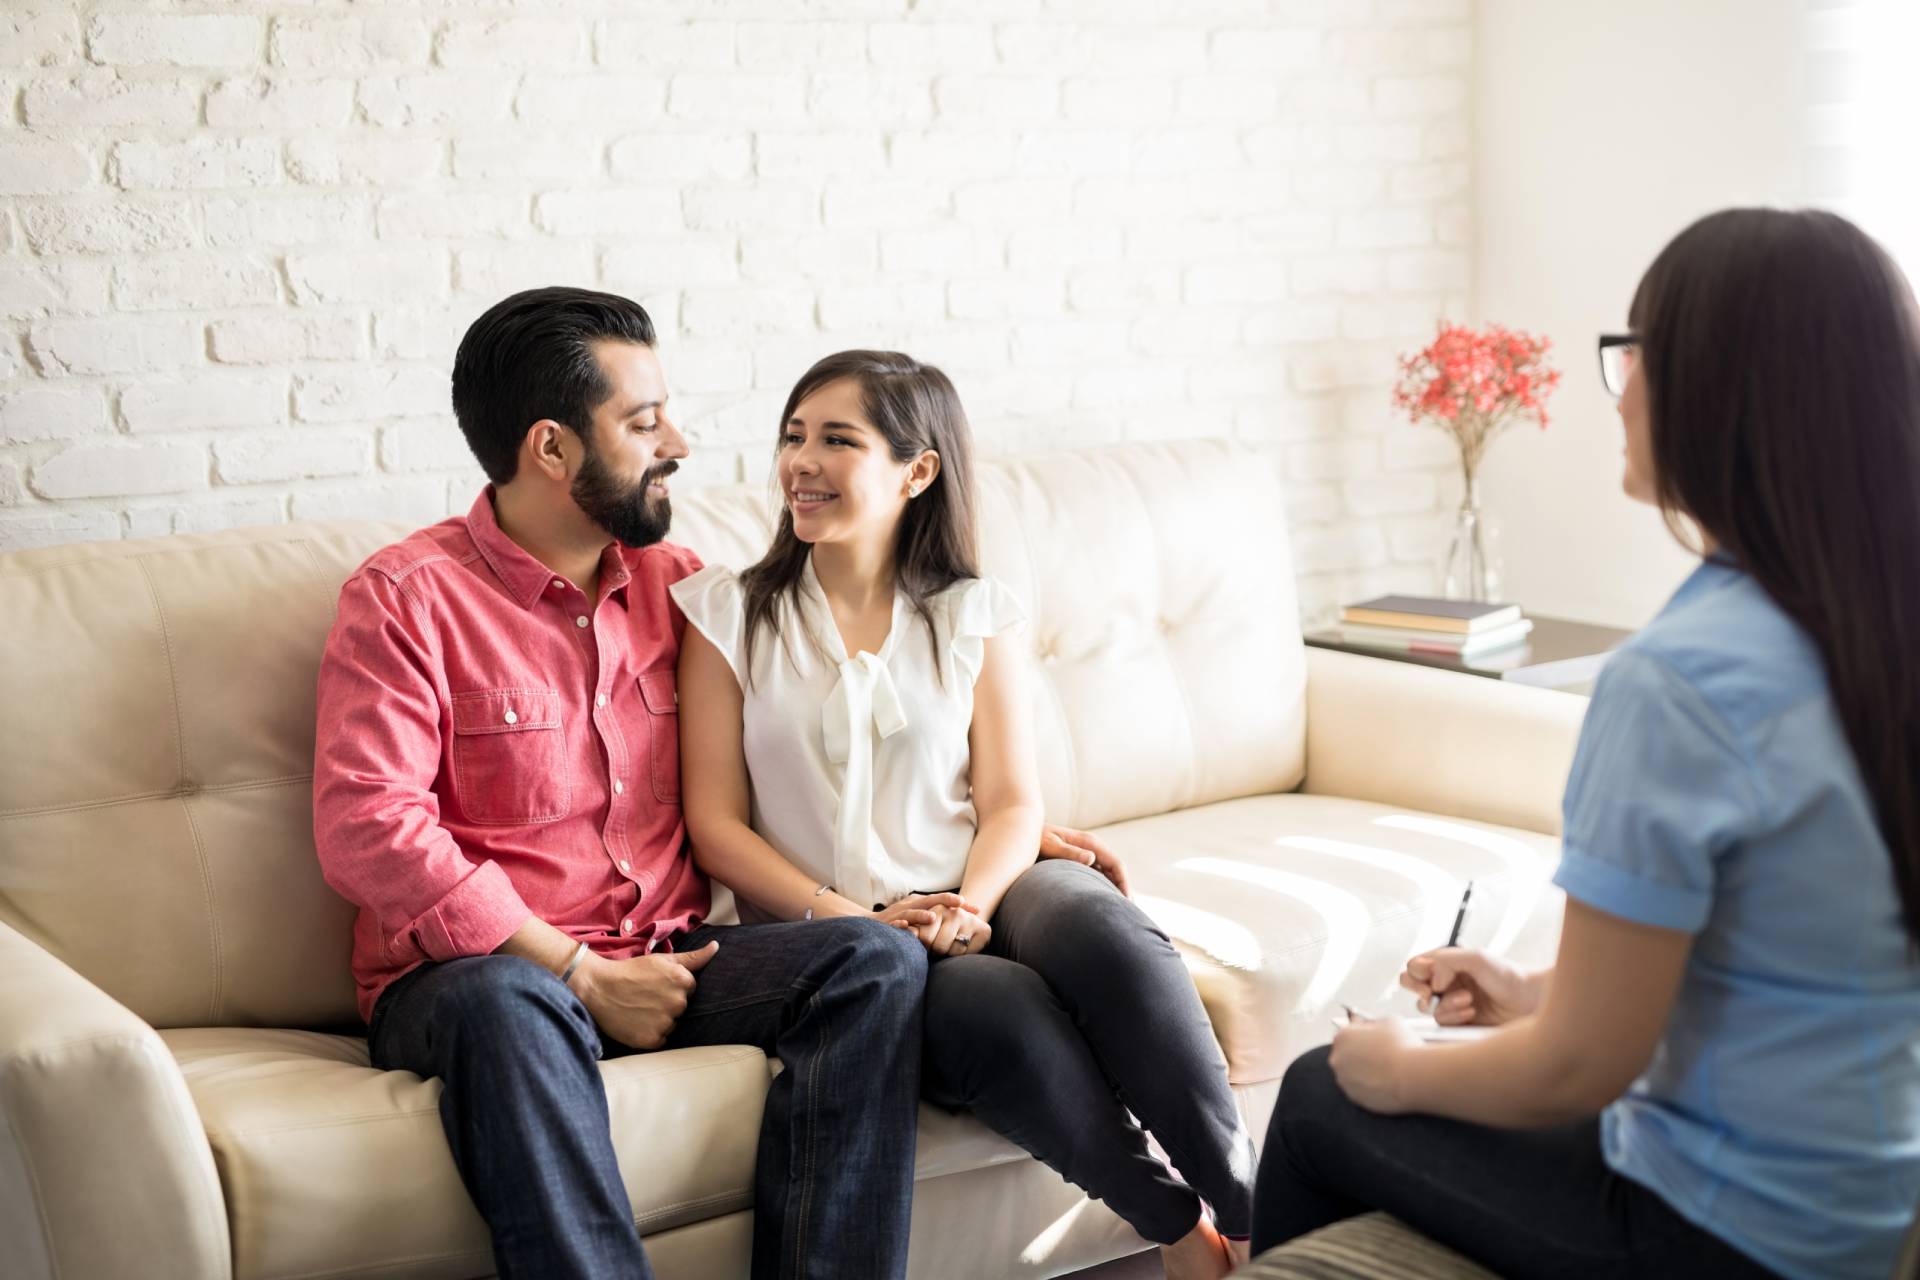 A couple sitting on a beige couch, smiling and holding hands, while speaking with a therapist who is taking notes during a couples therapy session in a bright room with a white brick wall